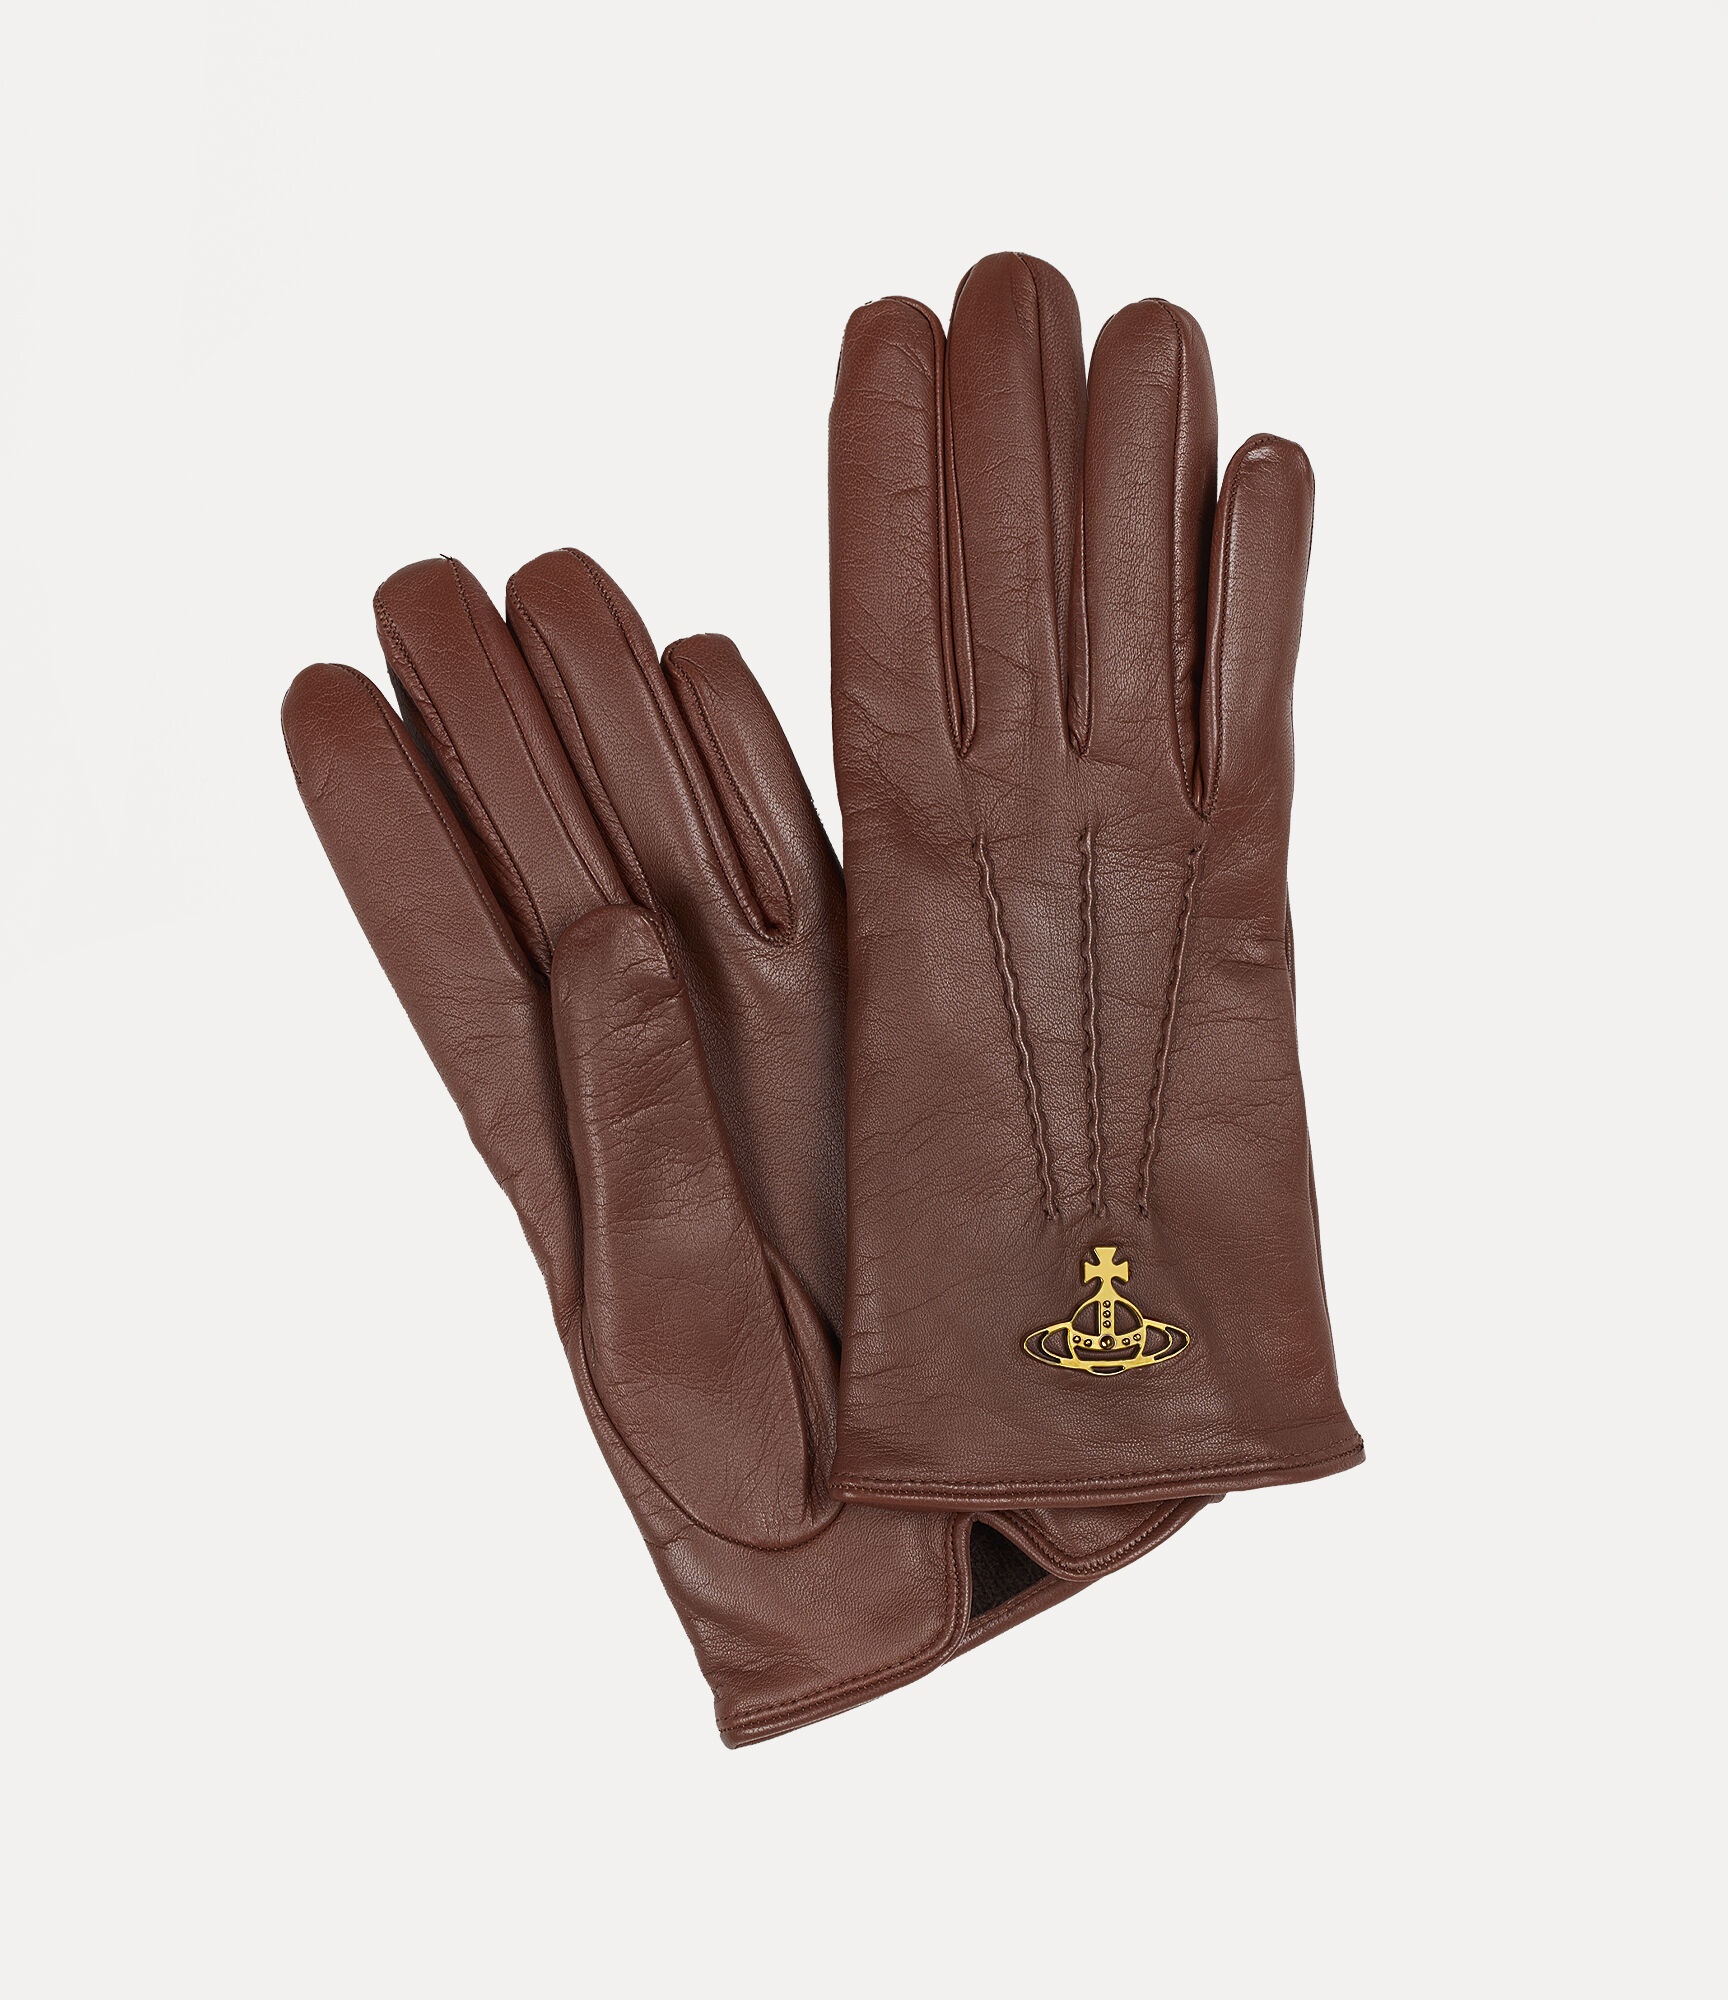 ORB CLASSIC GLOVES - 3